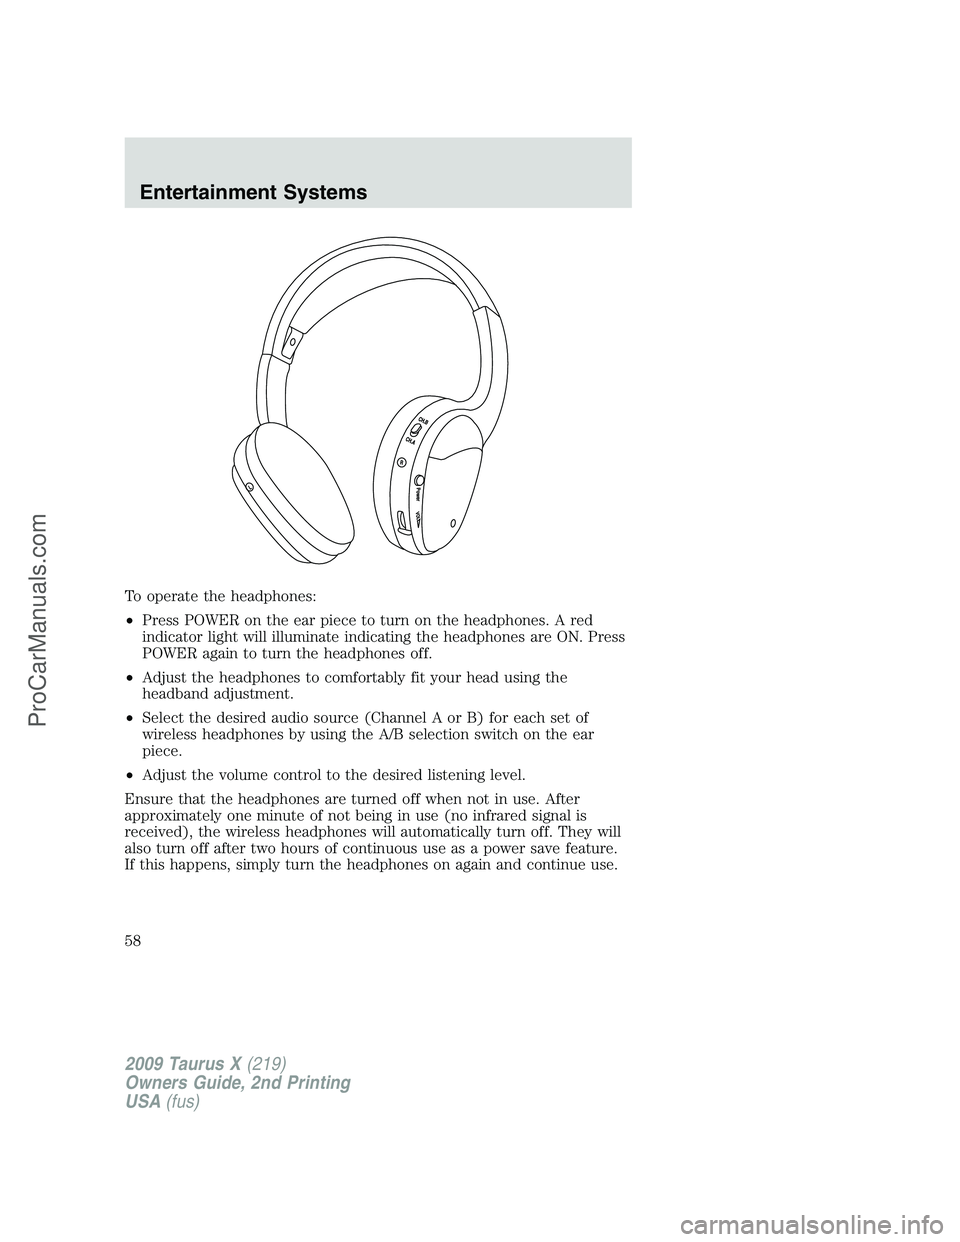 FORD FREESTYLE 2009 Workshop Manual To operate the headphones:
•Press POWER on the ear piece to turn on the headphones. A red
indicator light will illuminate indicating the headphones are ON. Press
POWER again to turn the headphones o